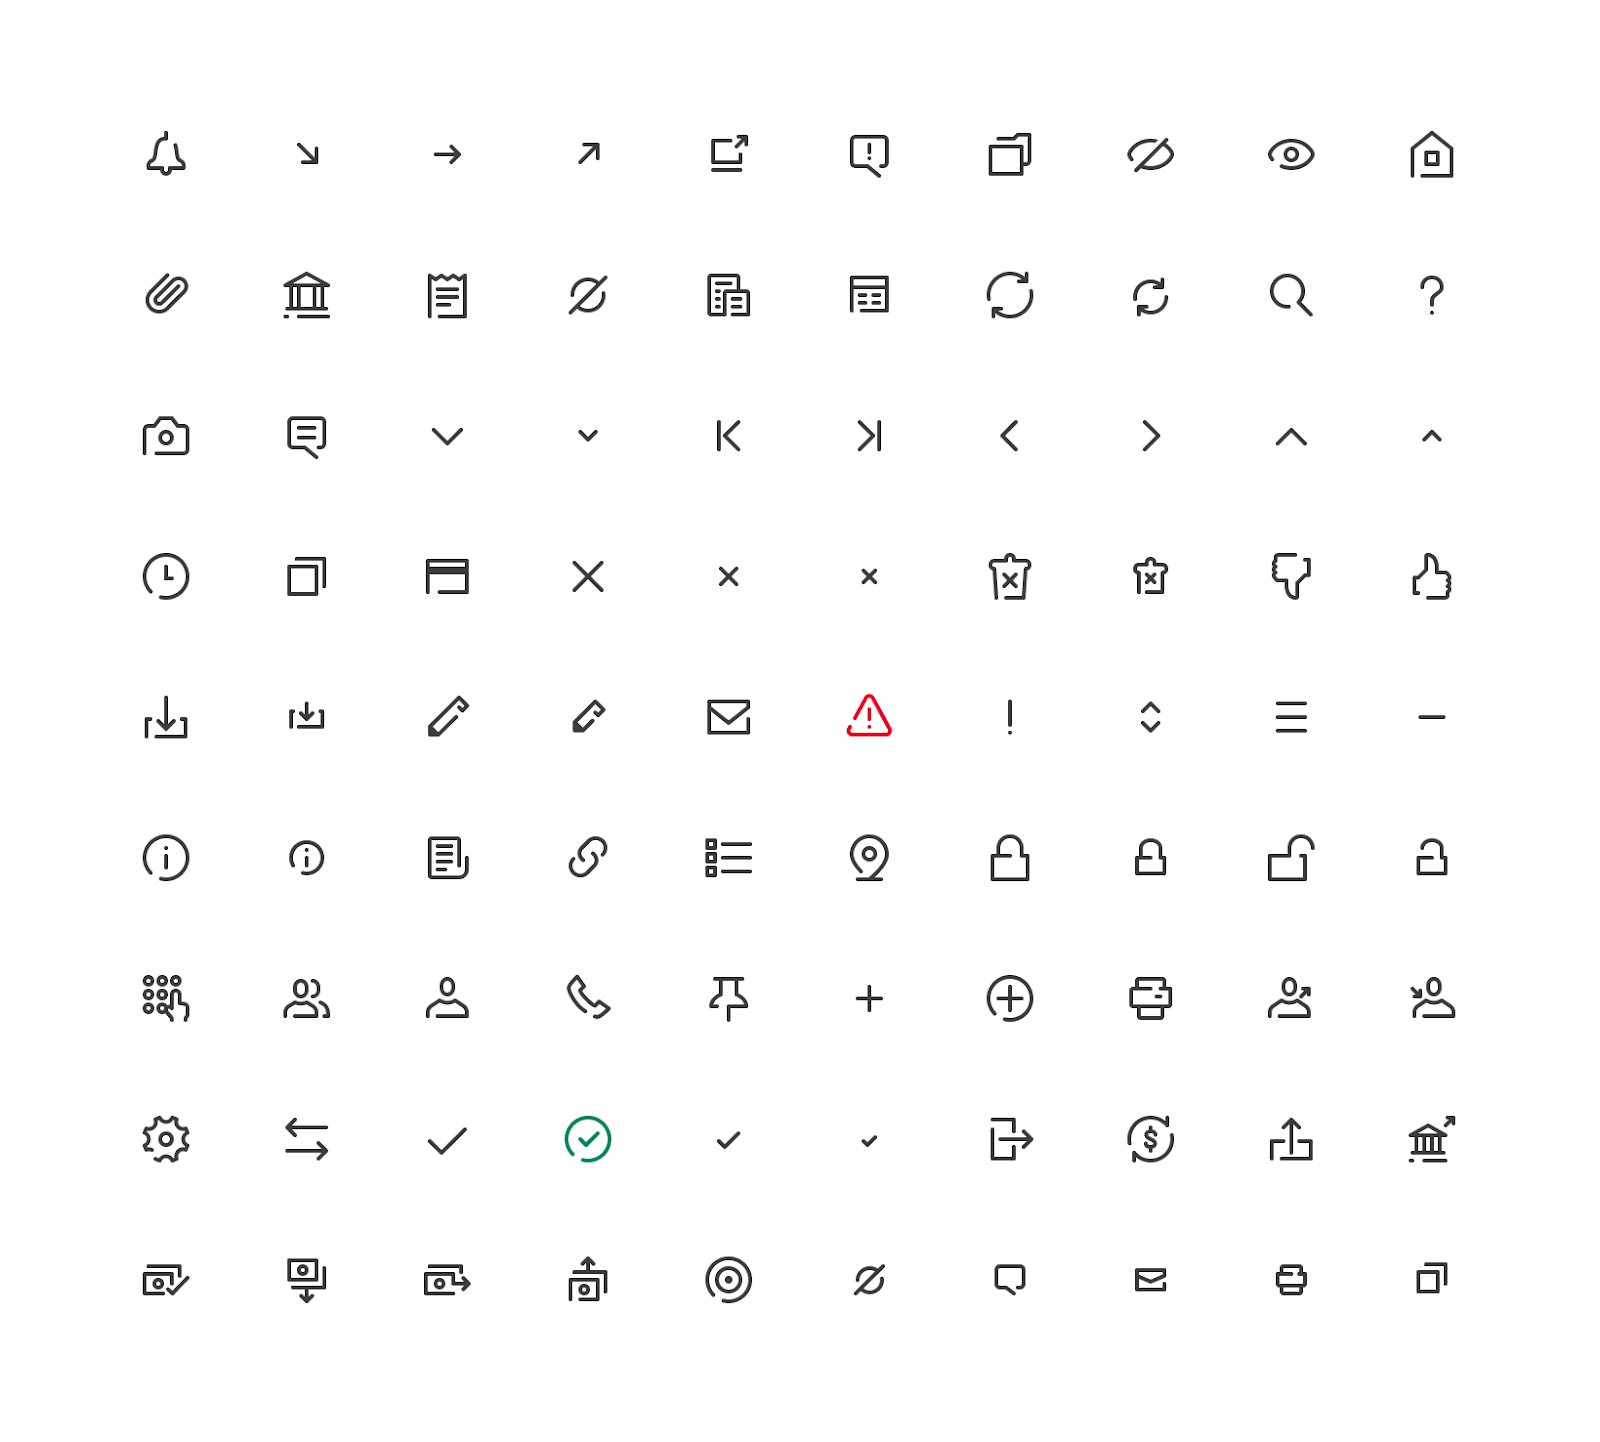 The icon set features a clear start and end point, conveying a sense of movement